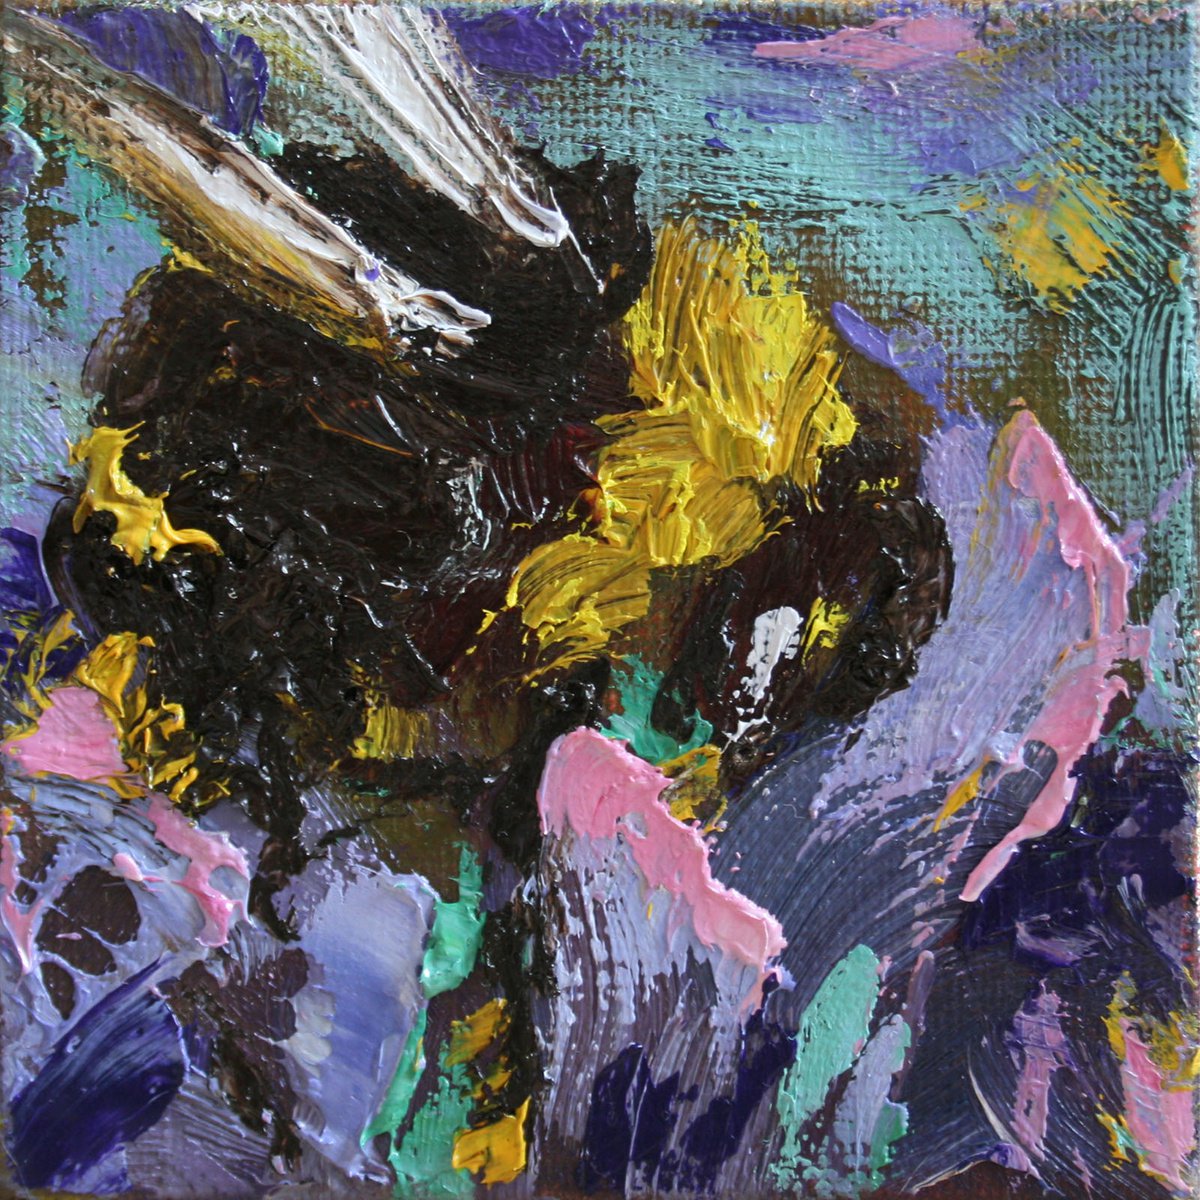 Bumblebee 09 / From my series Mini Picture / ORIGINAL PAINTING by Salana Art Gallery